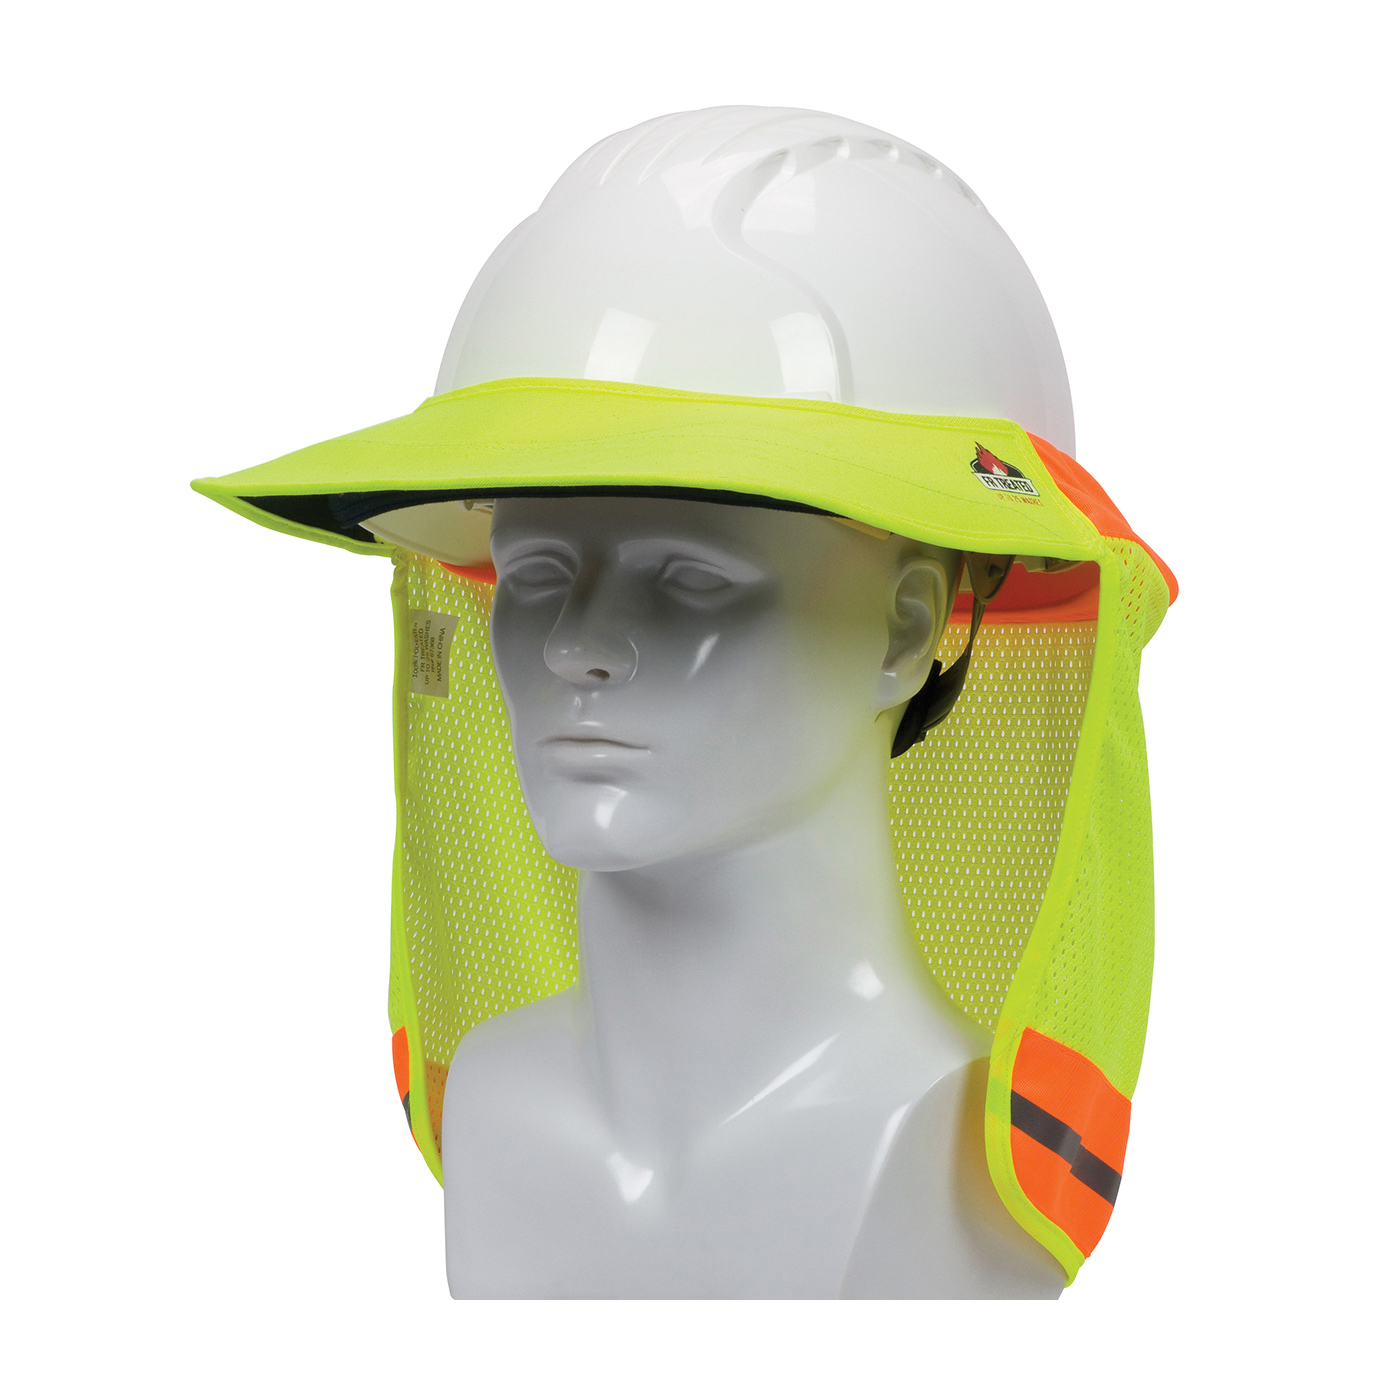 PIP® 396-801FR-YEL EZ-Cool® Hard Hat Visor and Neck Shade, For Use With Cap Style and Full Brim Hard Hats